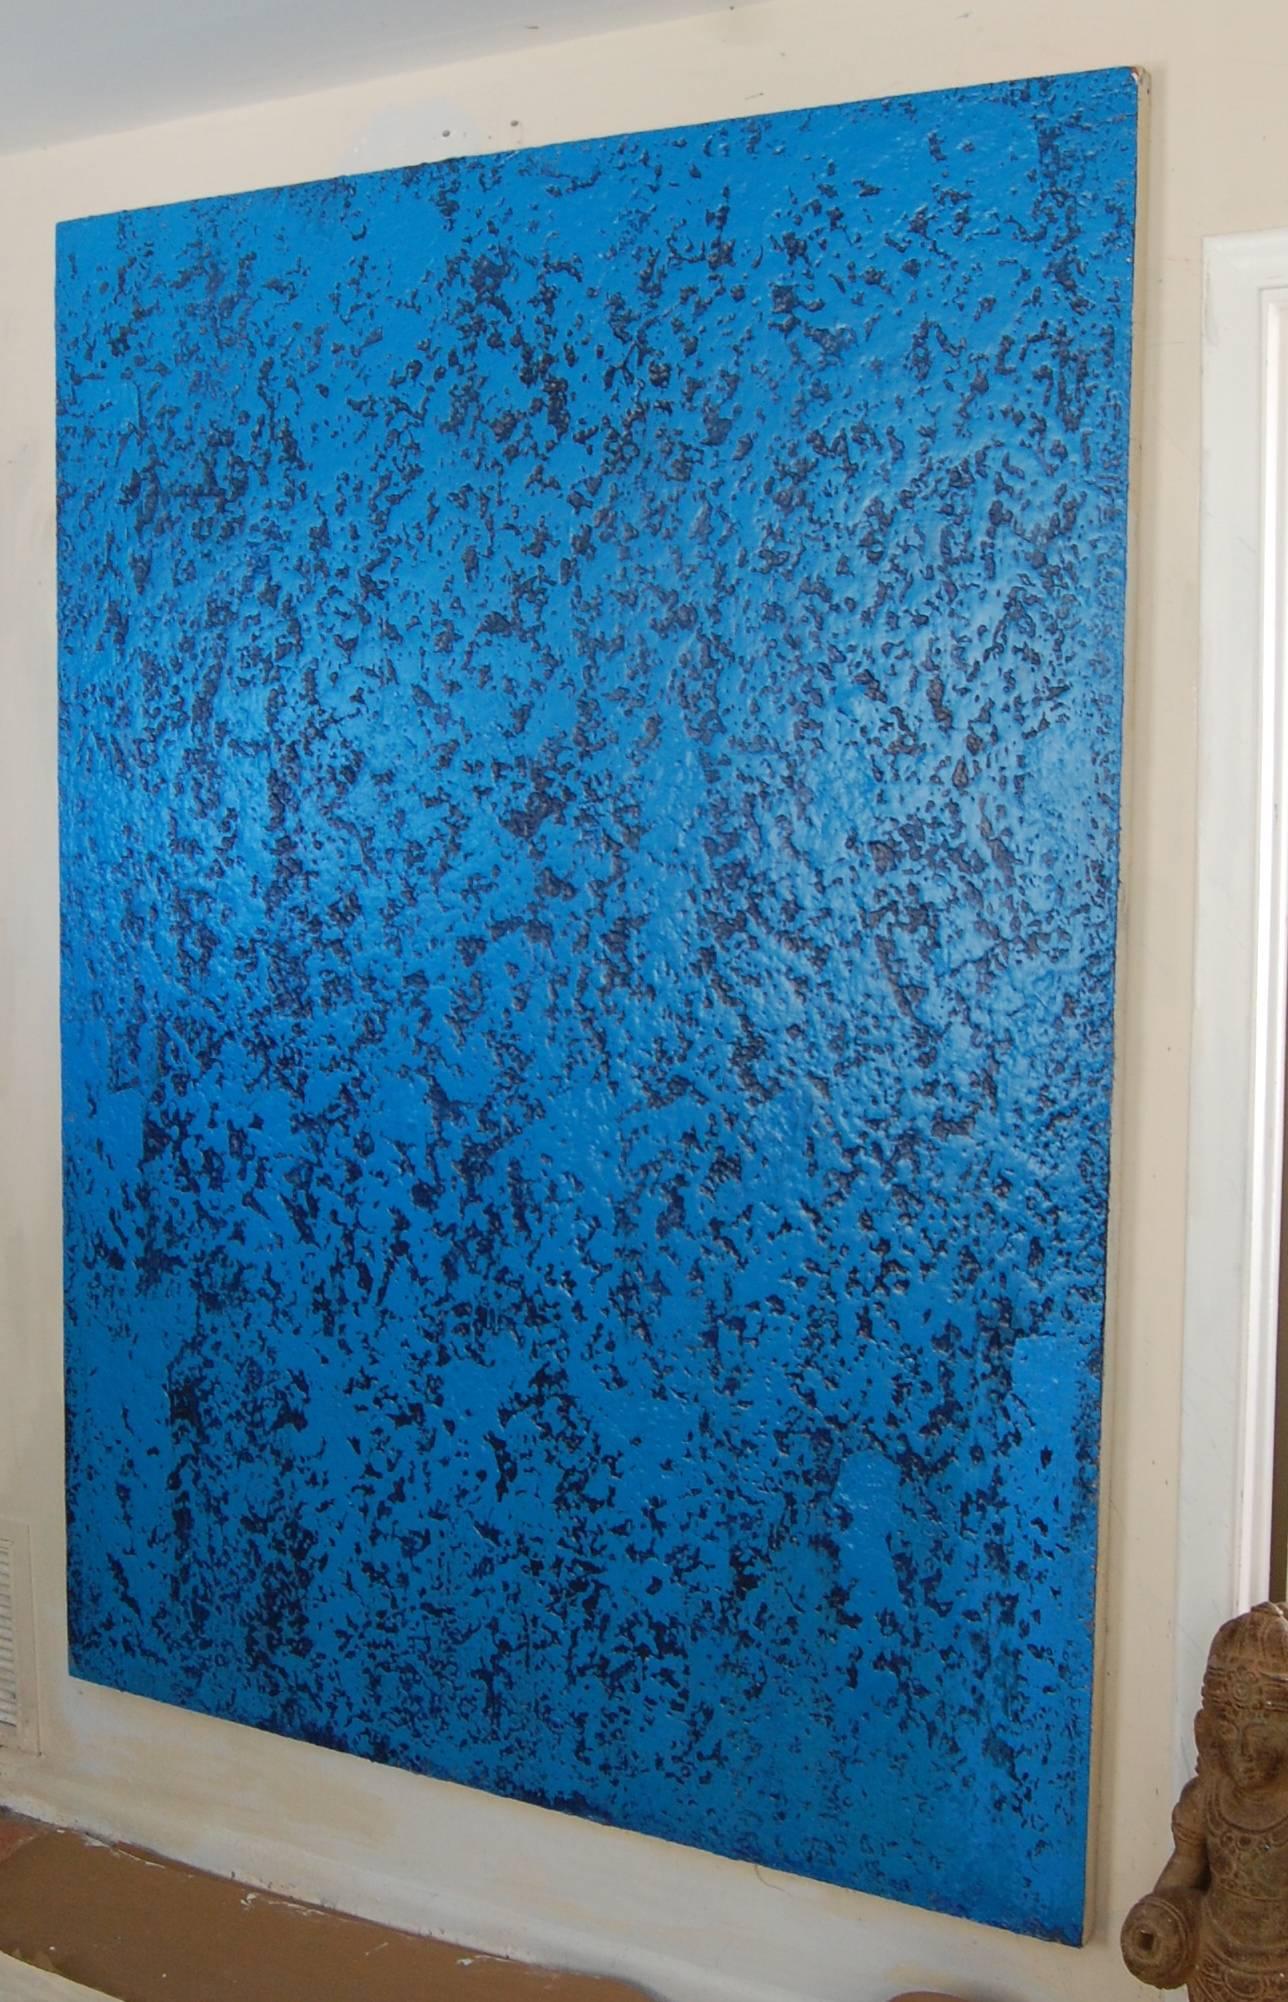 Infinity 2018
Large dynamic royal blue and navy heavy texture acrylic on canvas. 
John Frates is an American artist born in 1943. John has been painting full time for the last 15 years, he has exhibited his paintings in galleries and art shows in